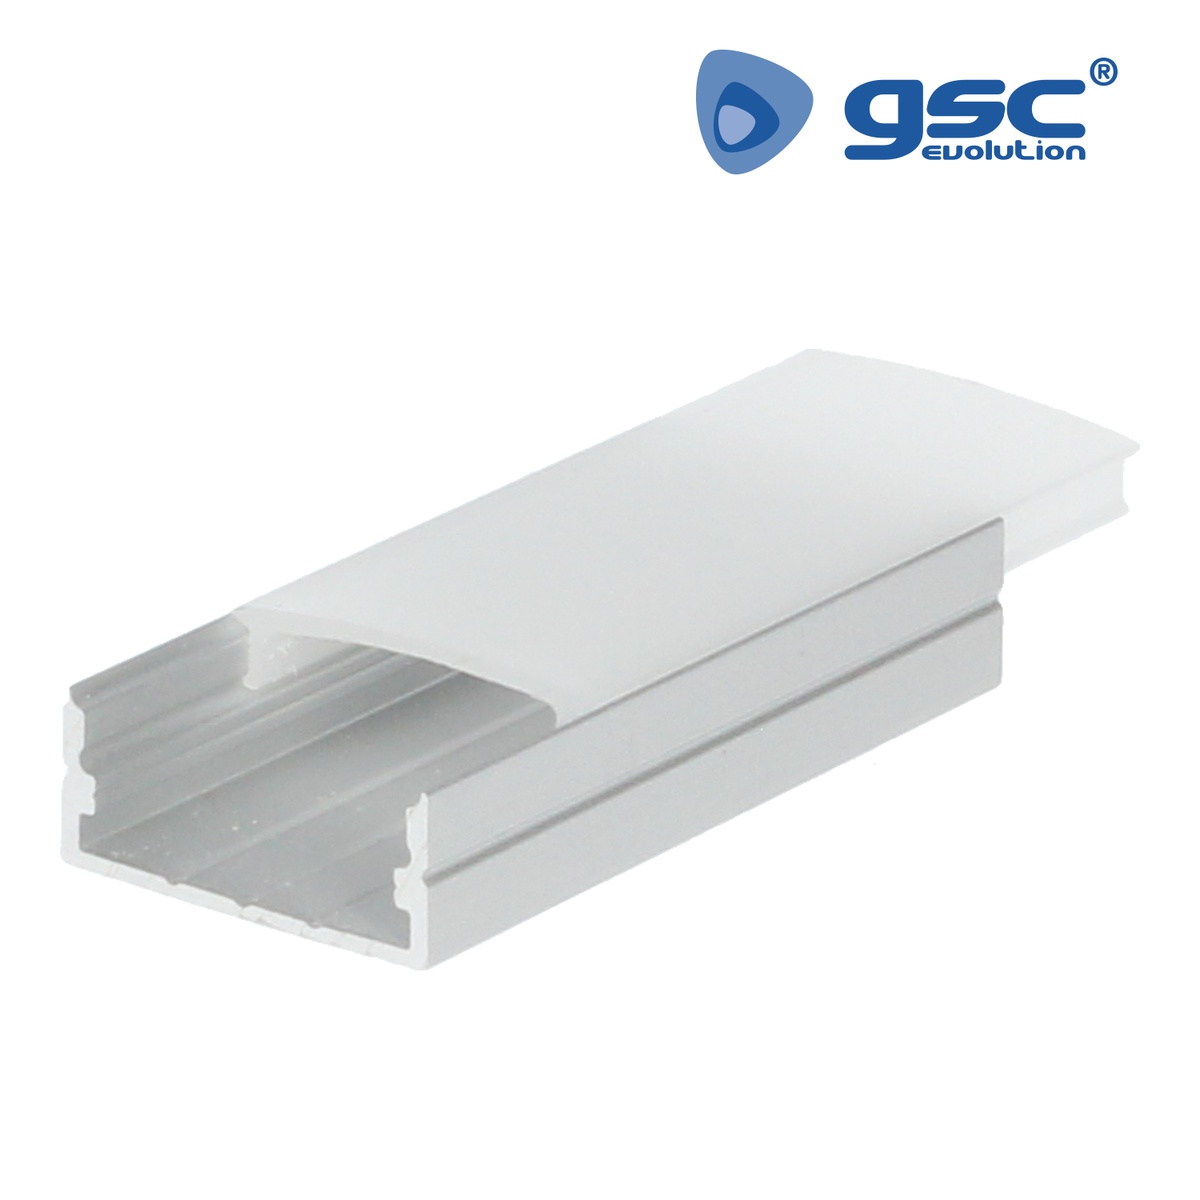 2M surface aluminum profile for LED strips up to 21mm